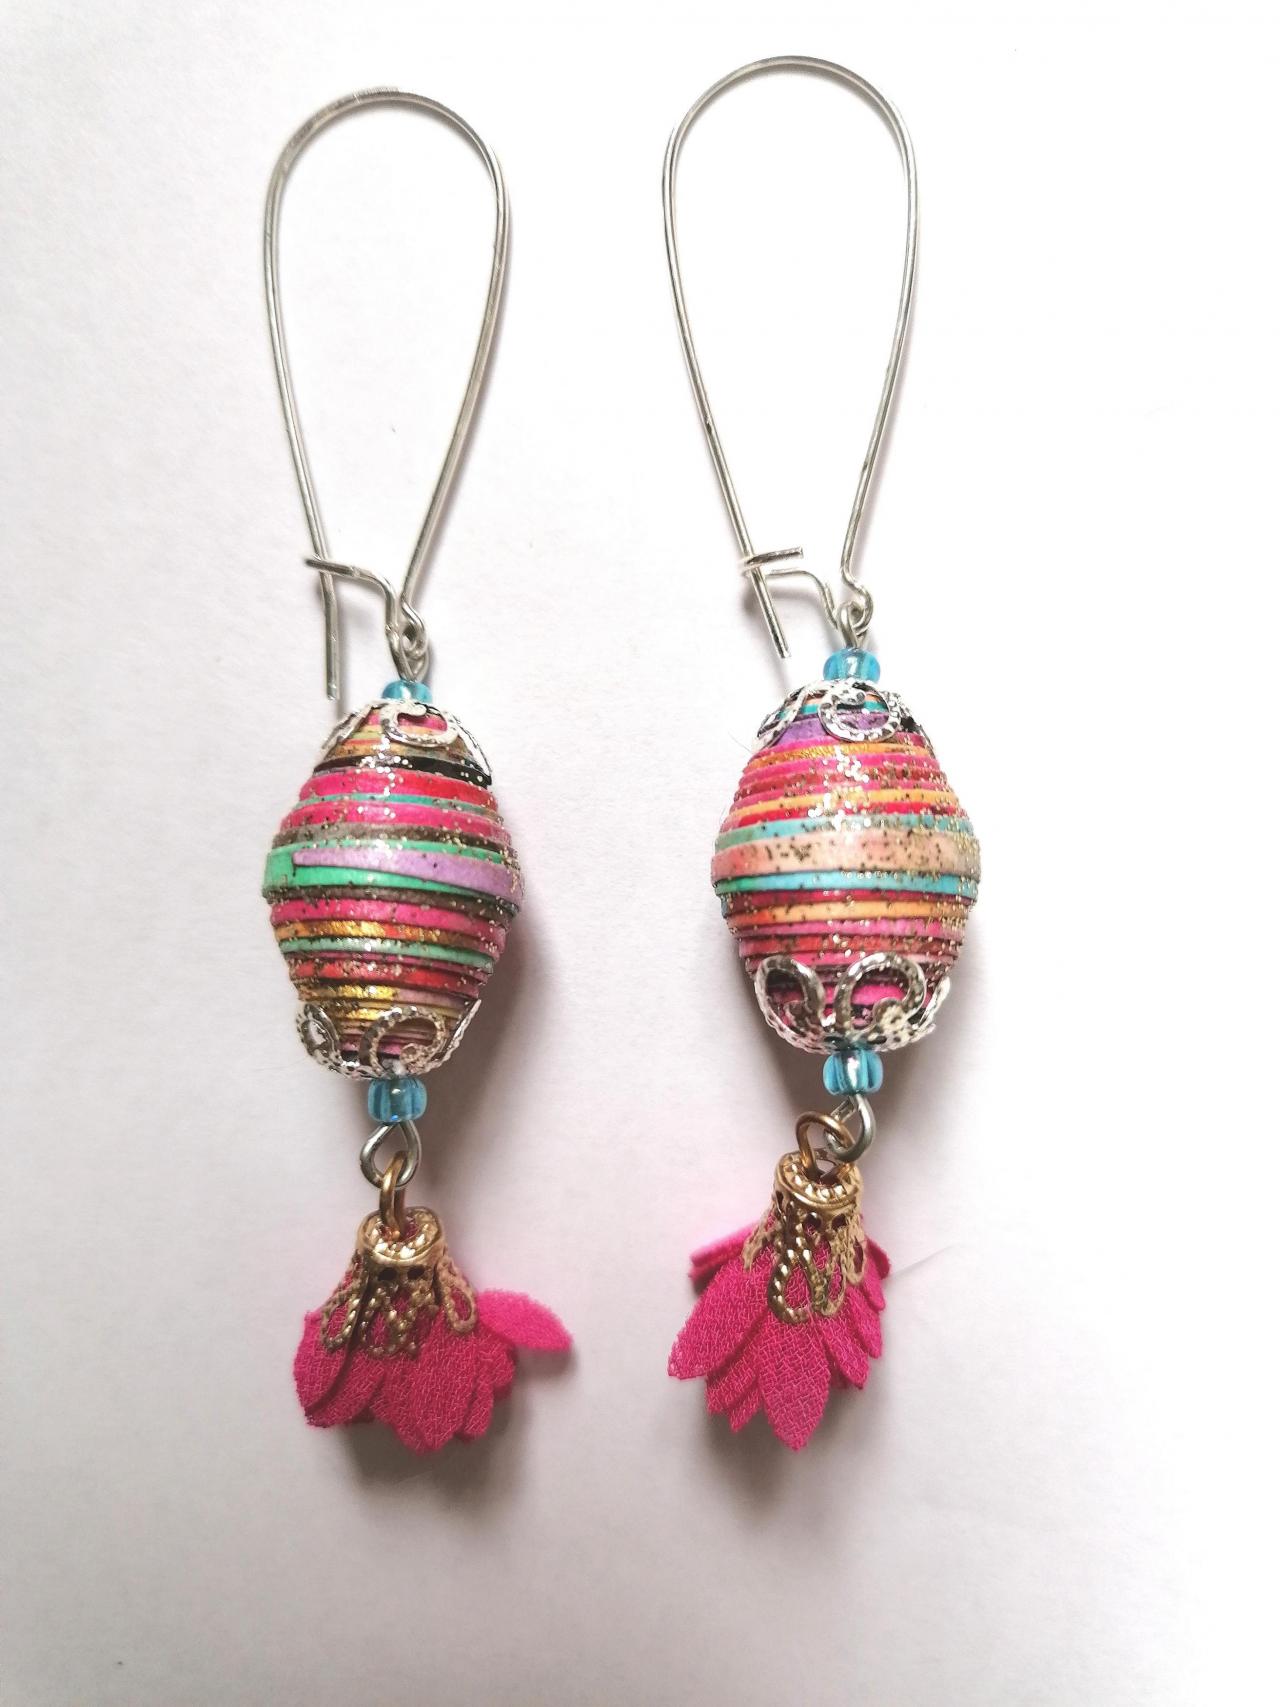 Frida Boutique Collection - "frida Flower" Earrings Iii